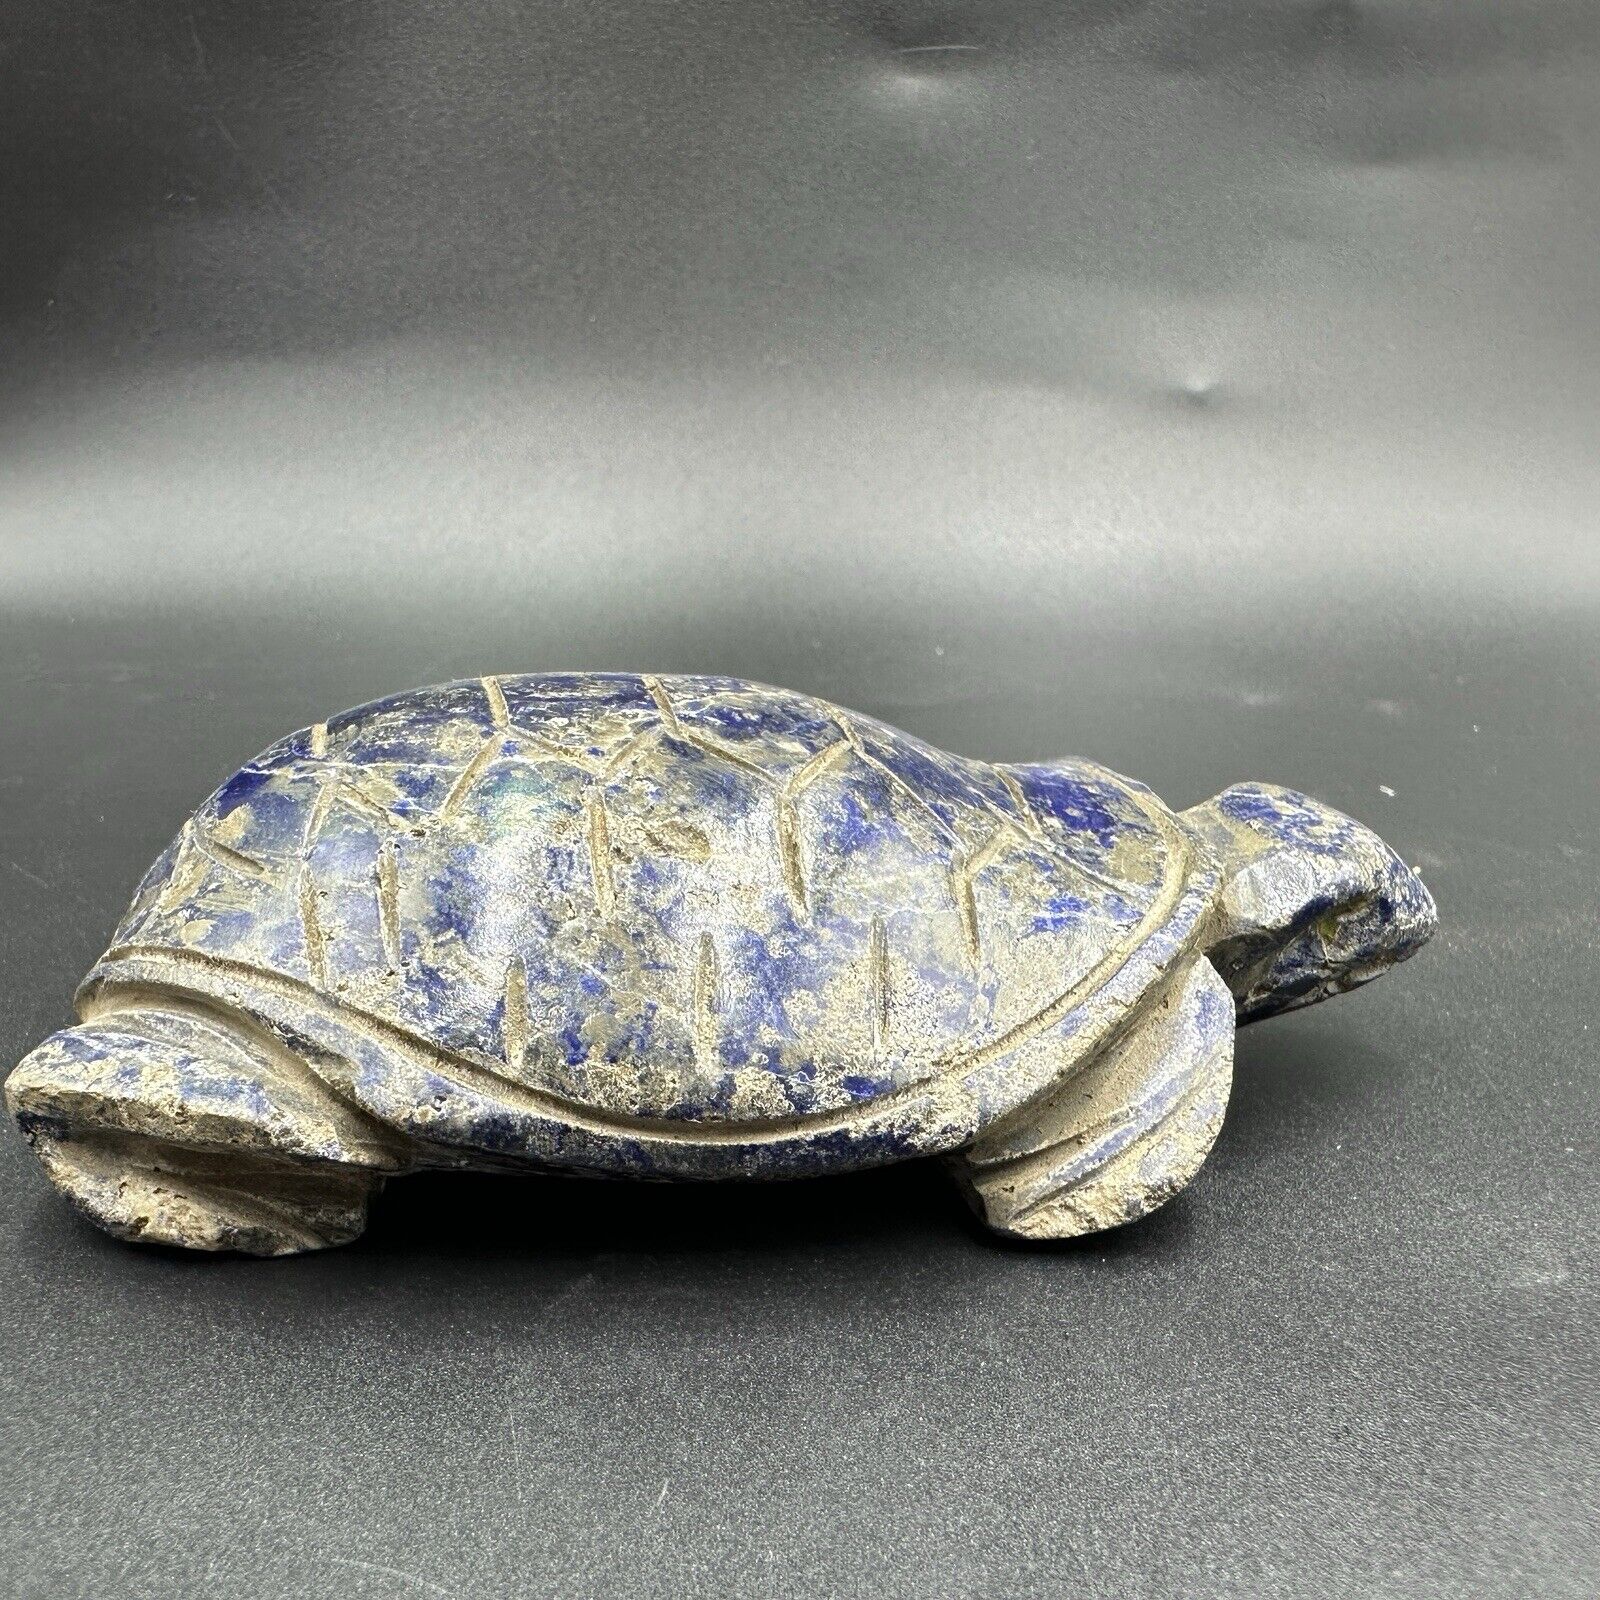 Old Handmade Natural Lapis Lazuli Stone Carving Turtle Statue